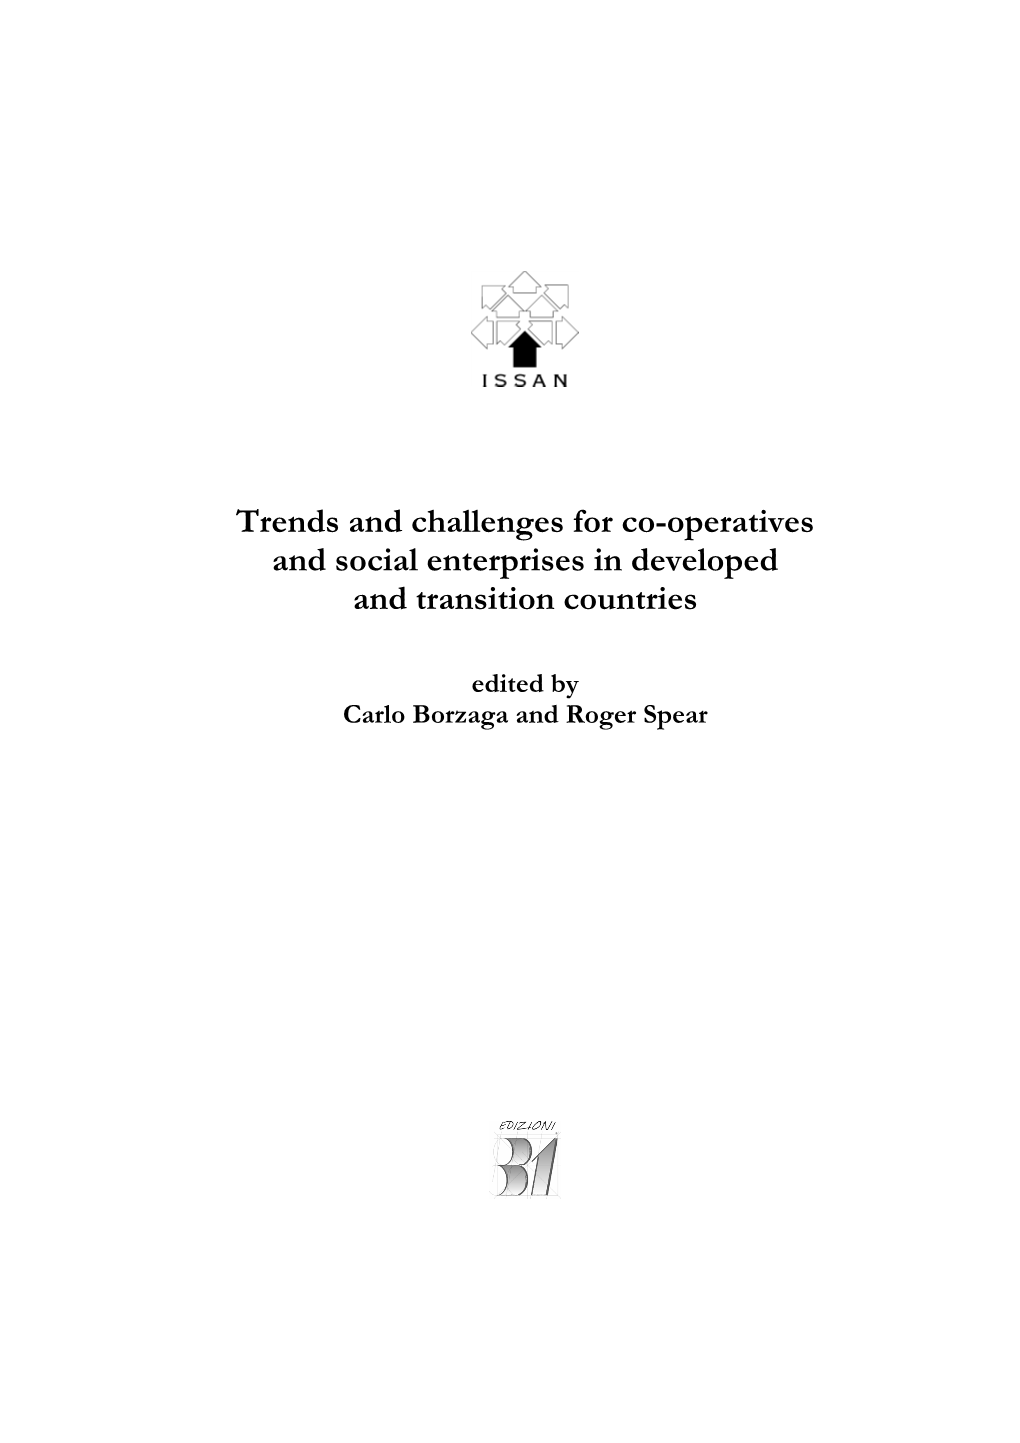 Trends and Challenges for Co-Operatives and Social Enterprises in Developed and Transition Countries